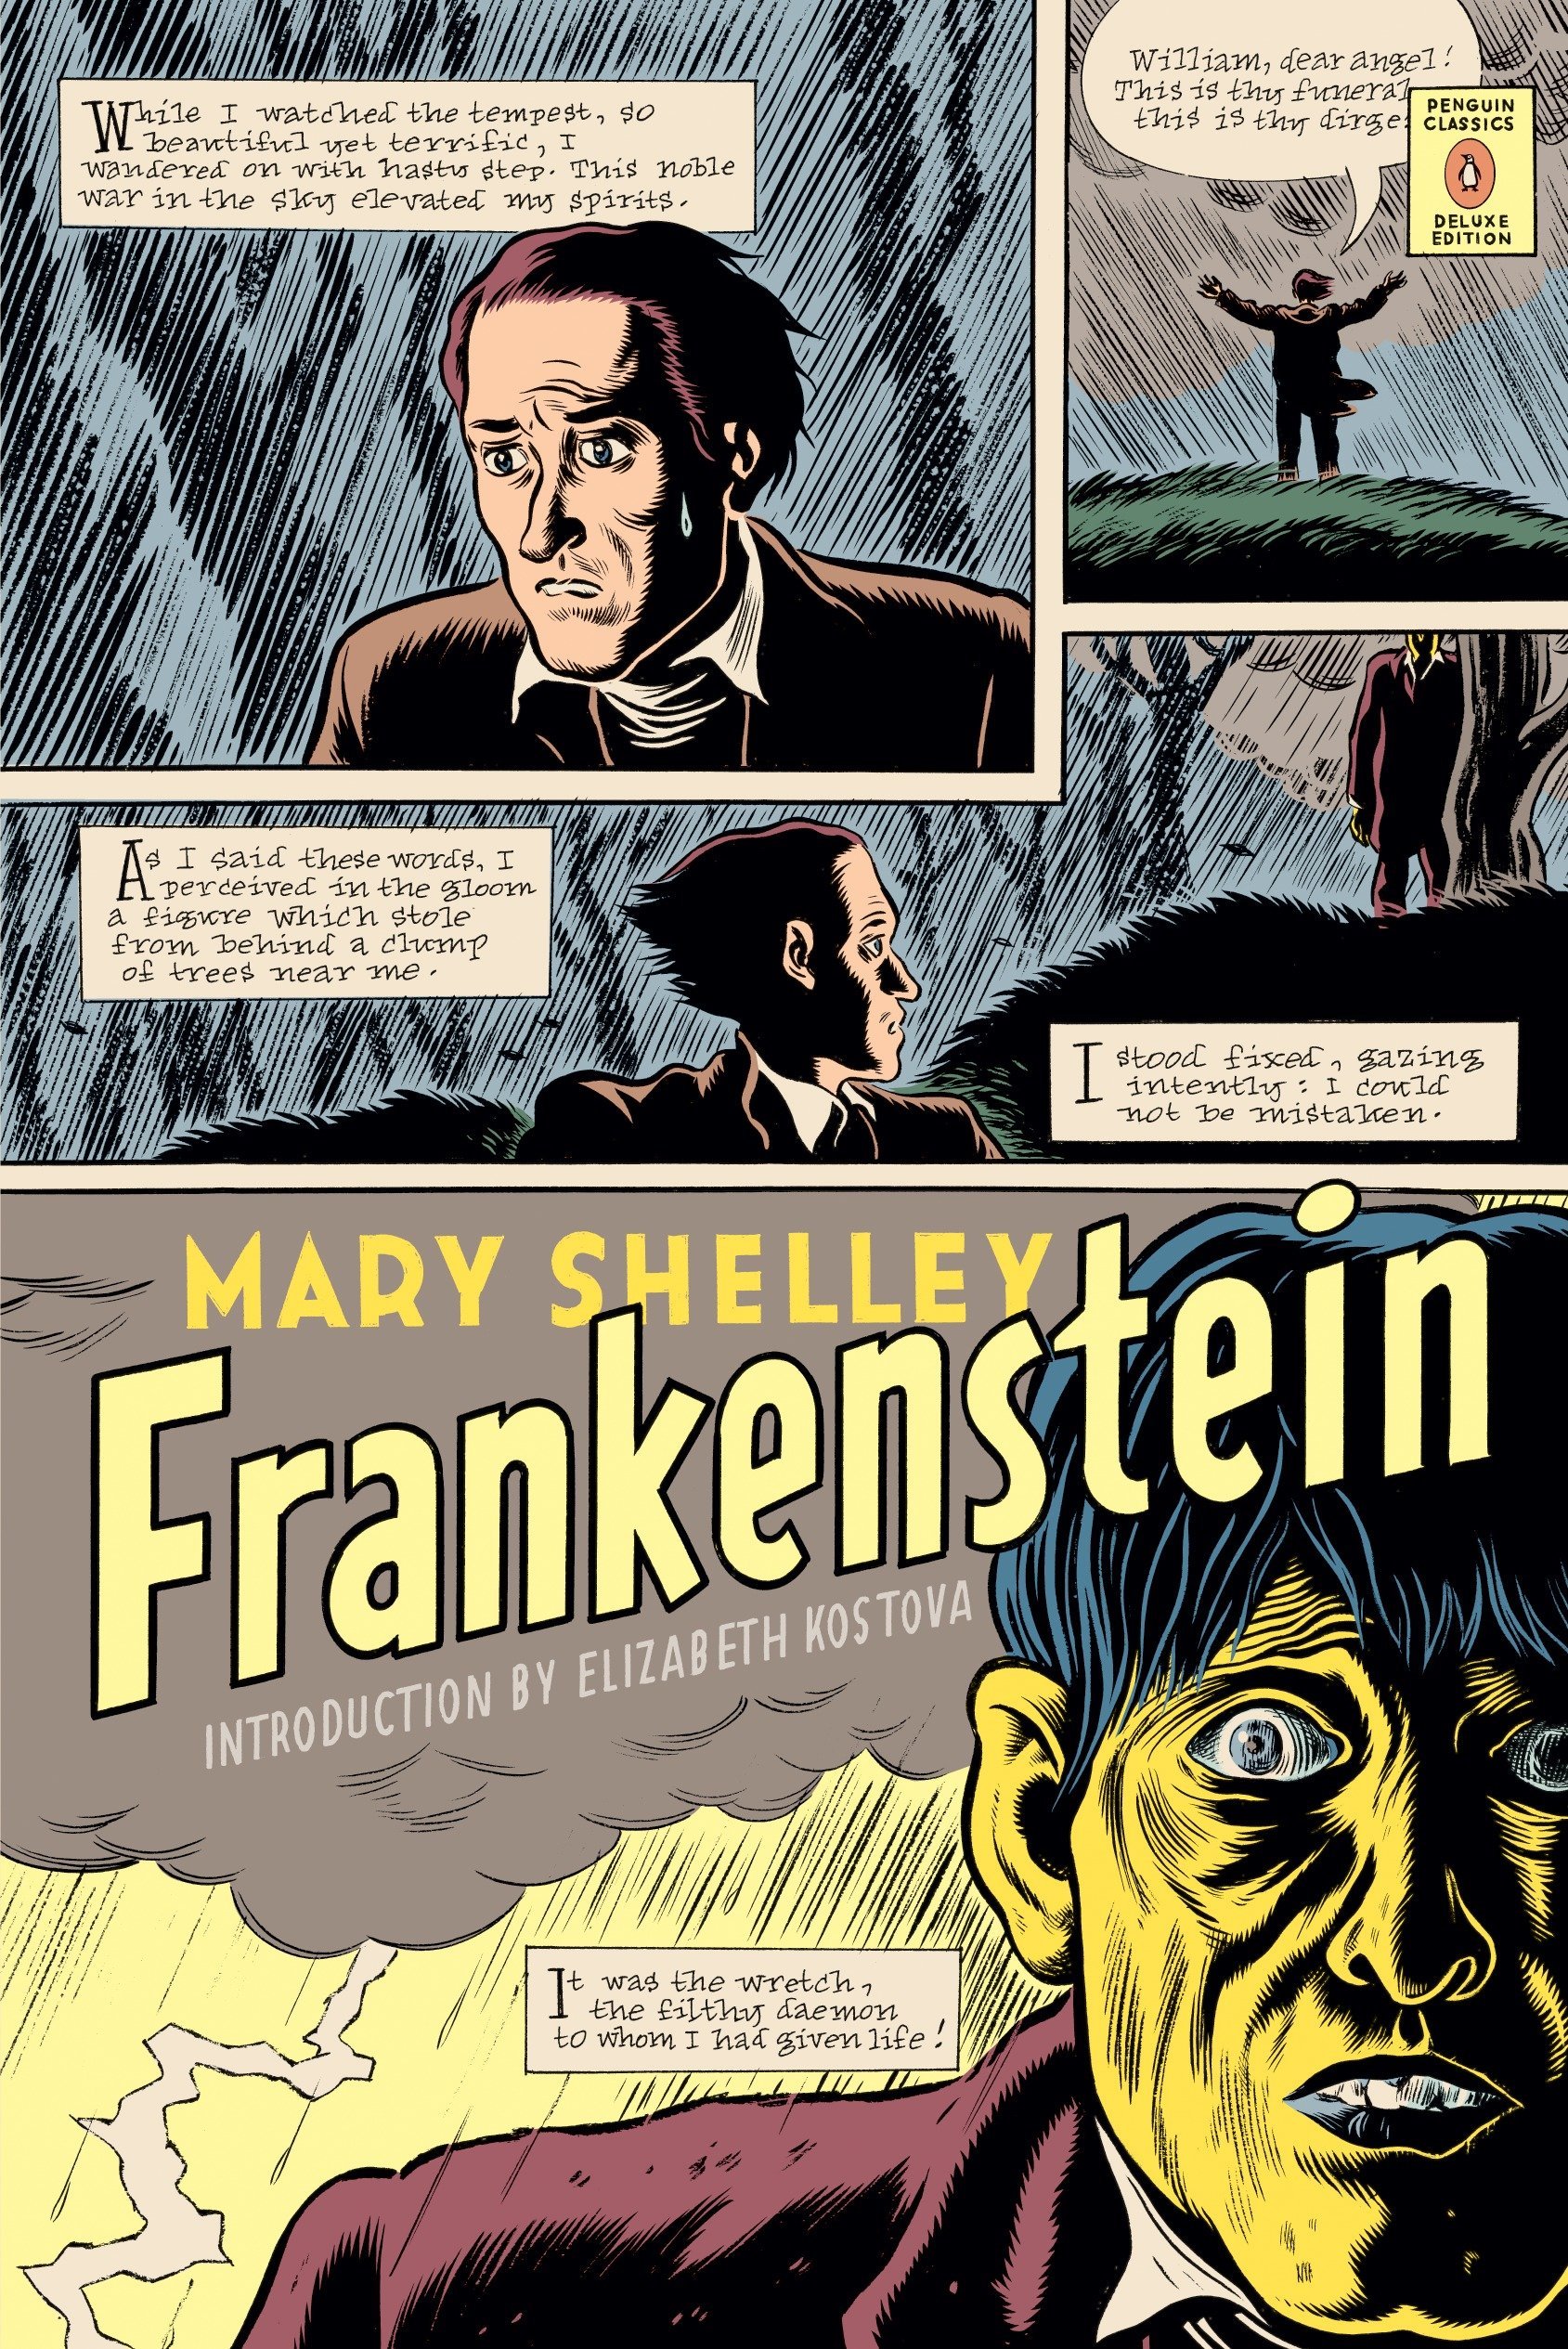 2007 Edition Book Cover of Frankenstein by Mary Shelley